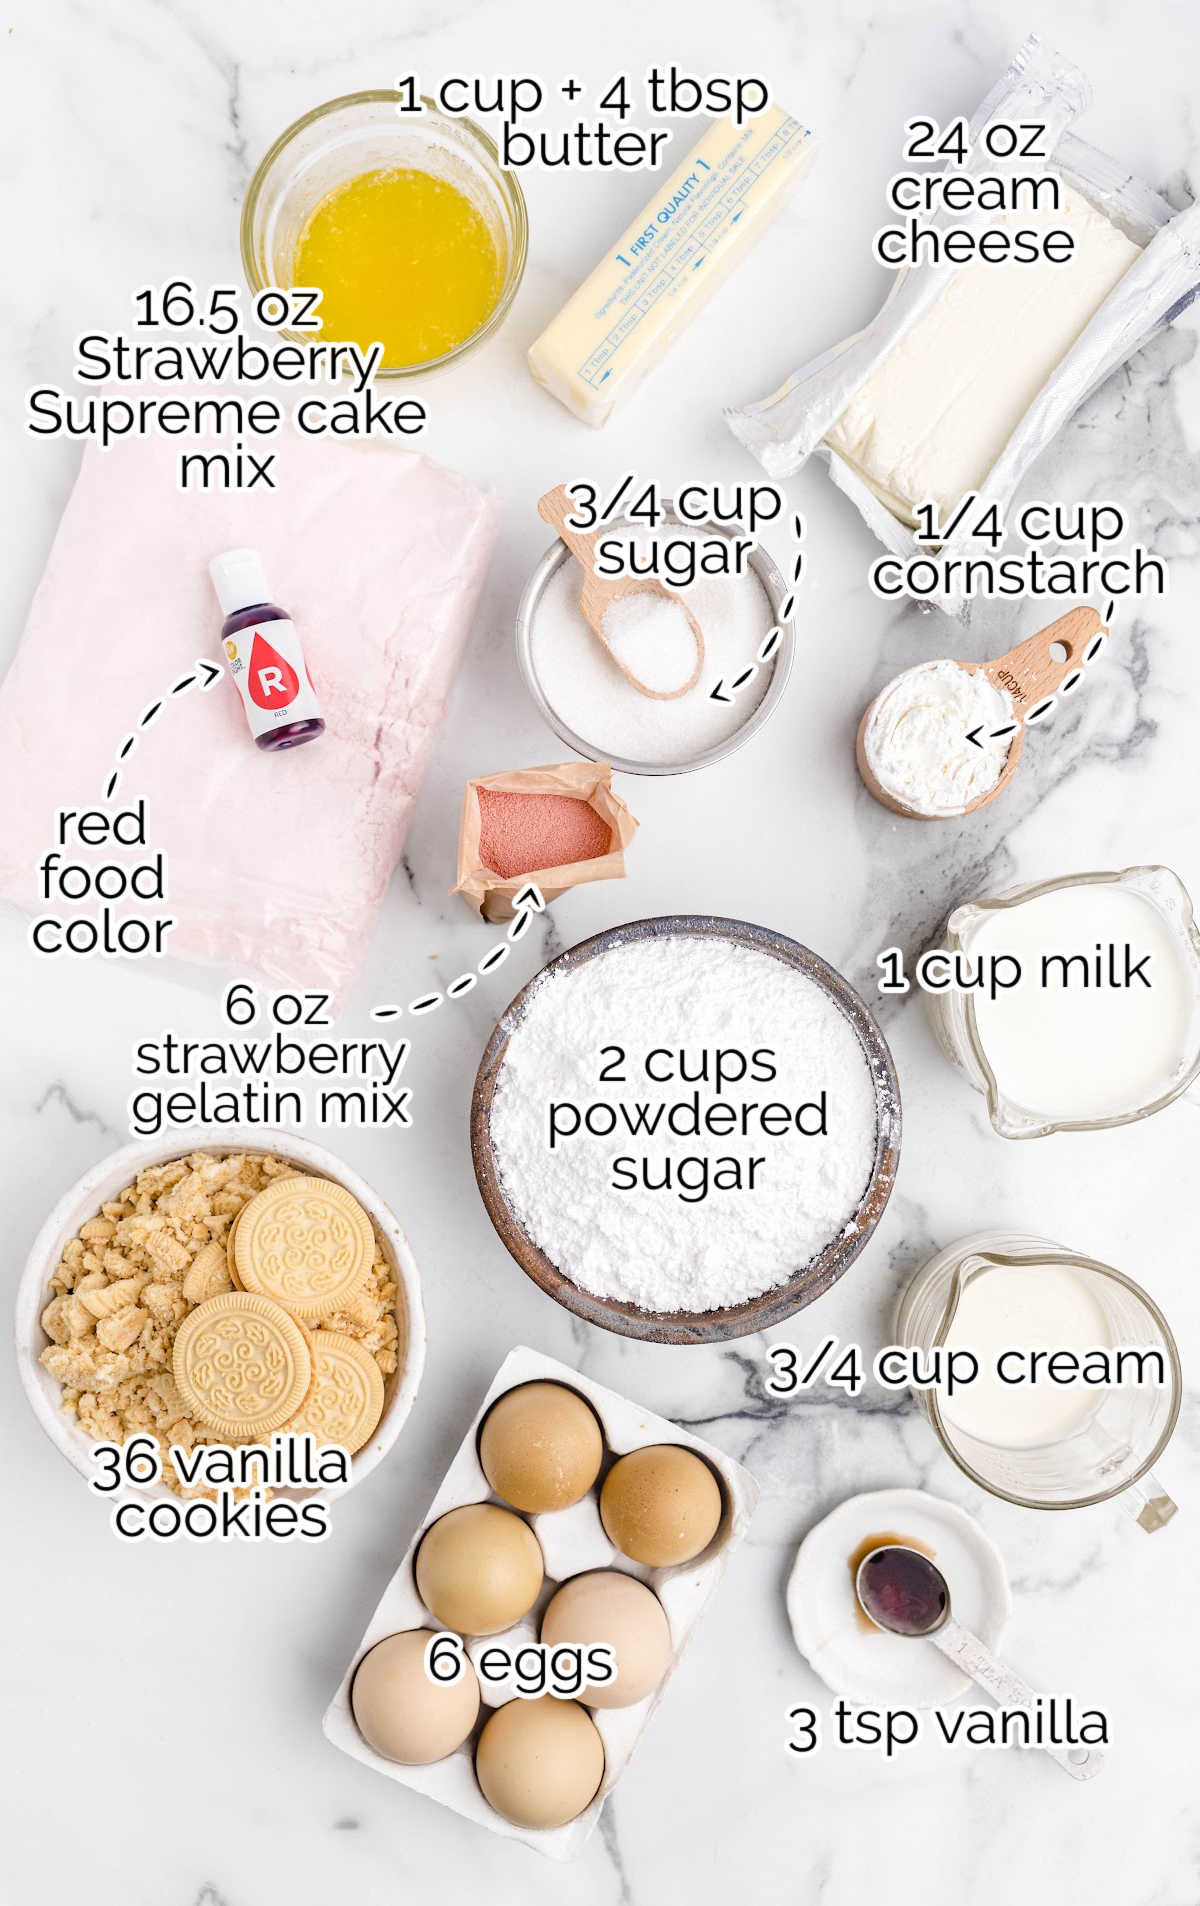 Strawberry Shortcake Cheesecake raw ingredients that are labeled